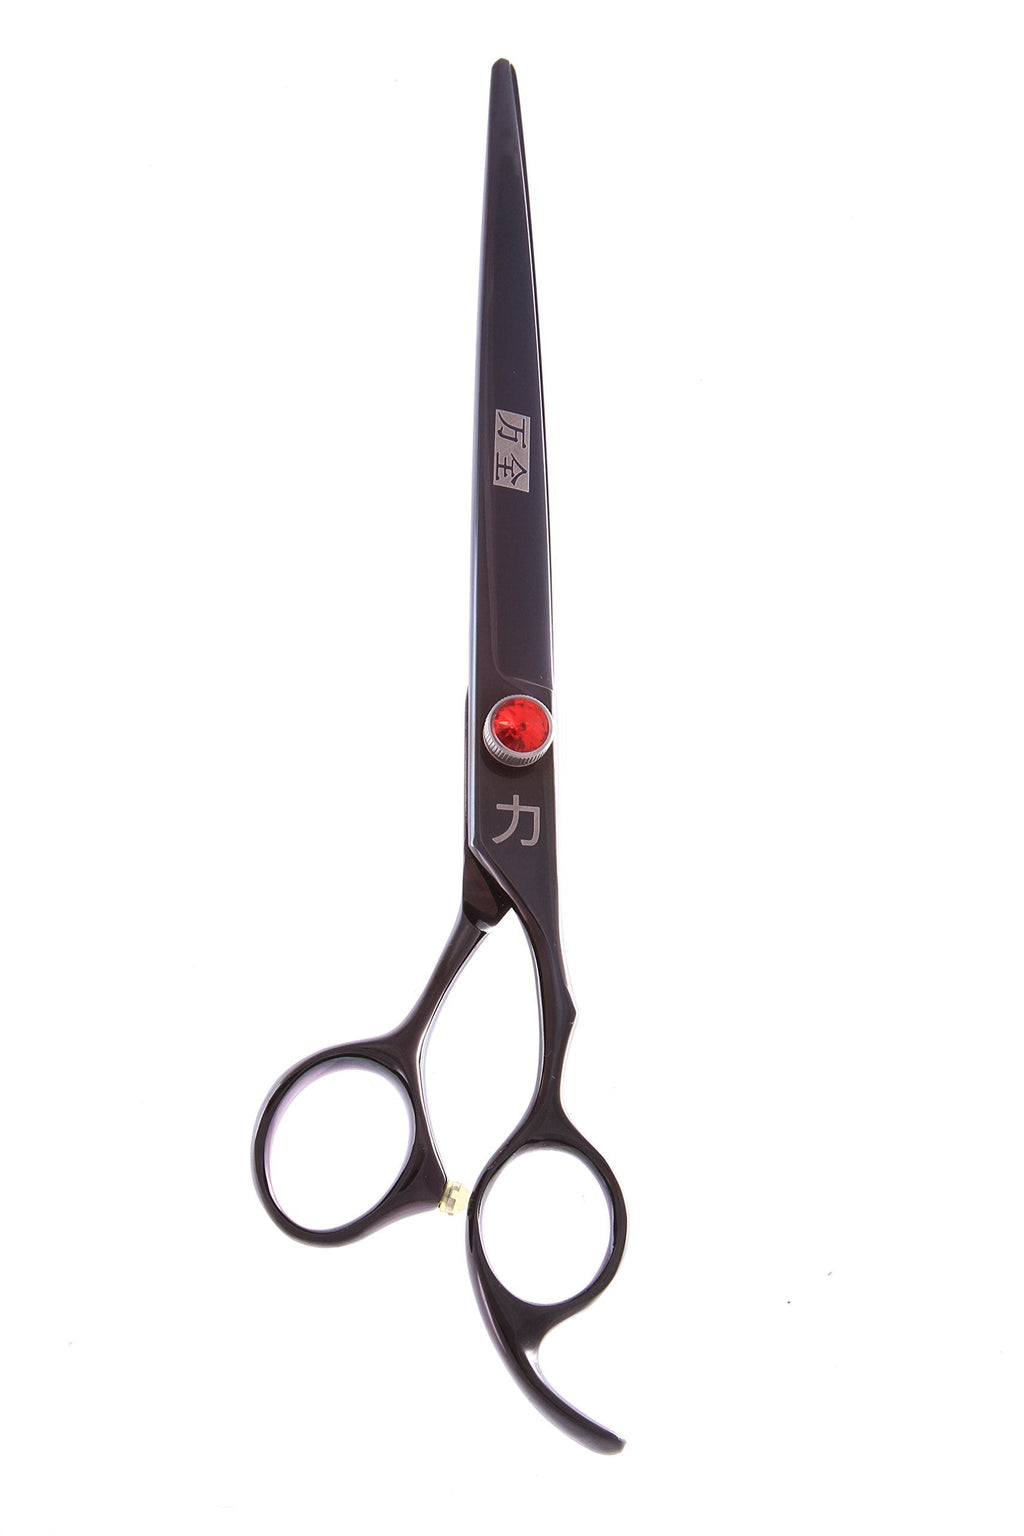 [Australia] - ShearsDirect Professional Black Titanium Cutting Shears Off Set Handle Design with Anatomic Thumb and Gem Stone Tension, 8.0-Inch 